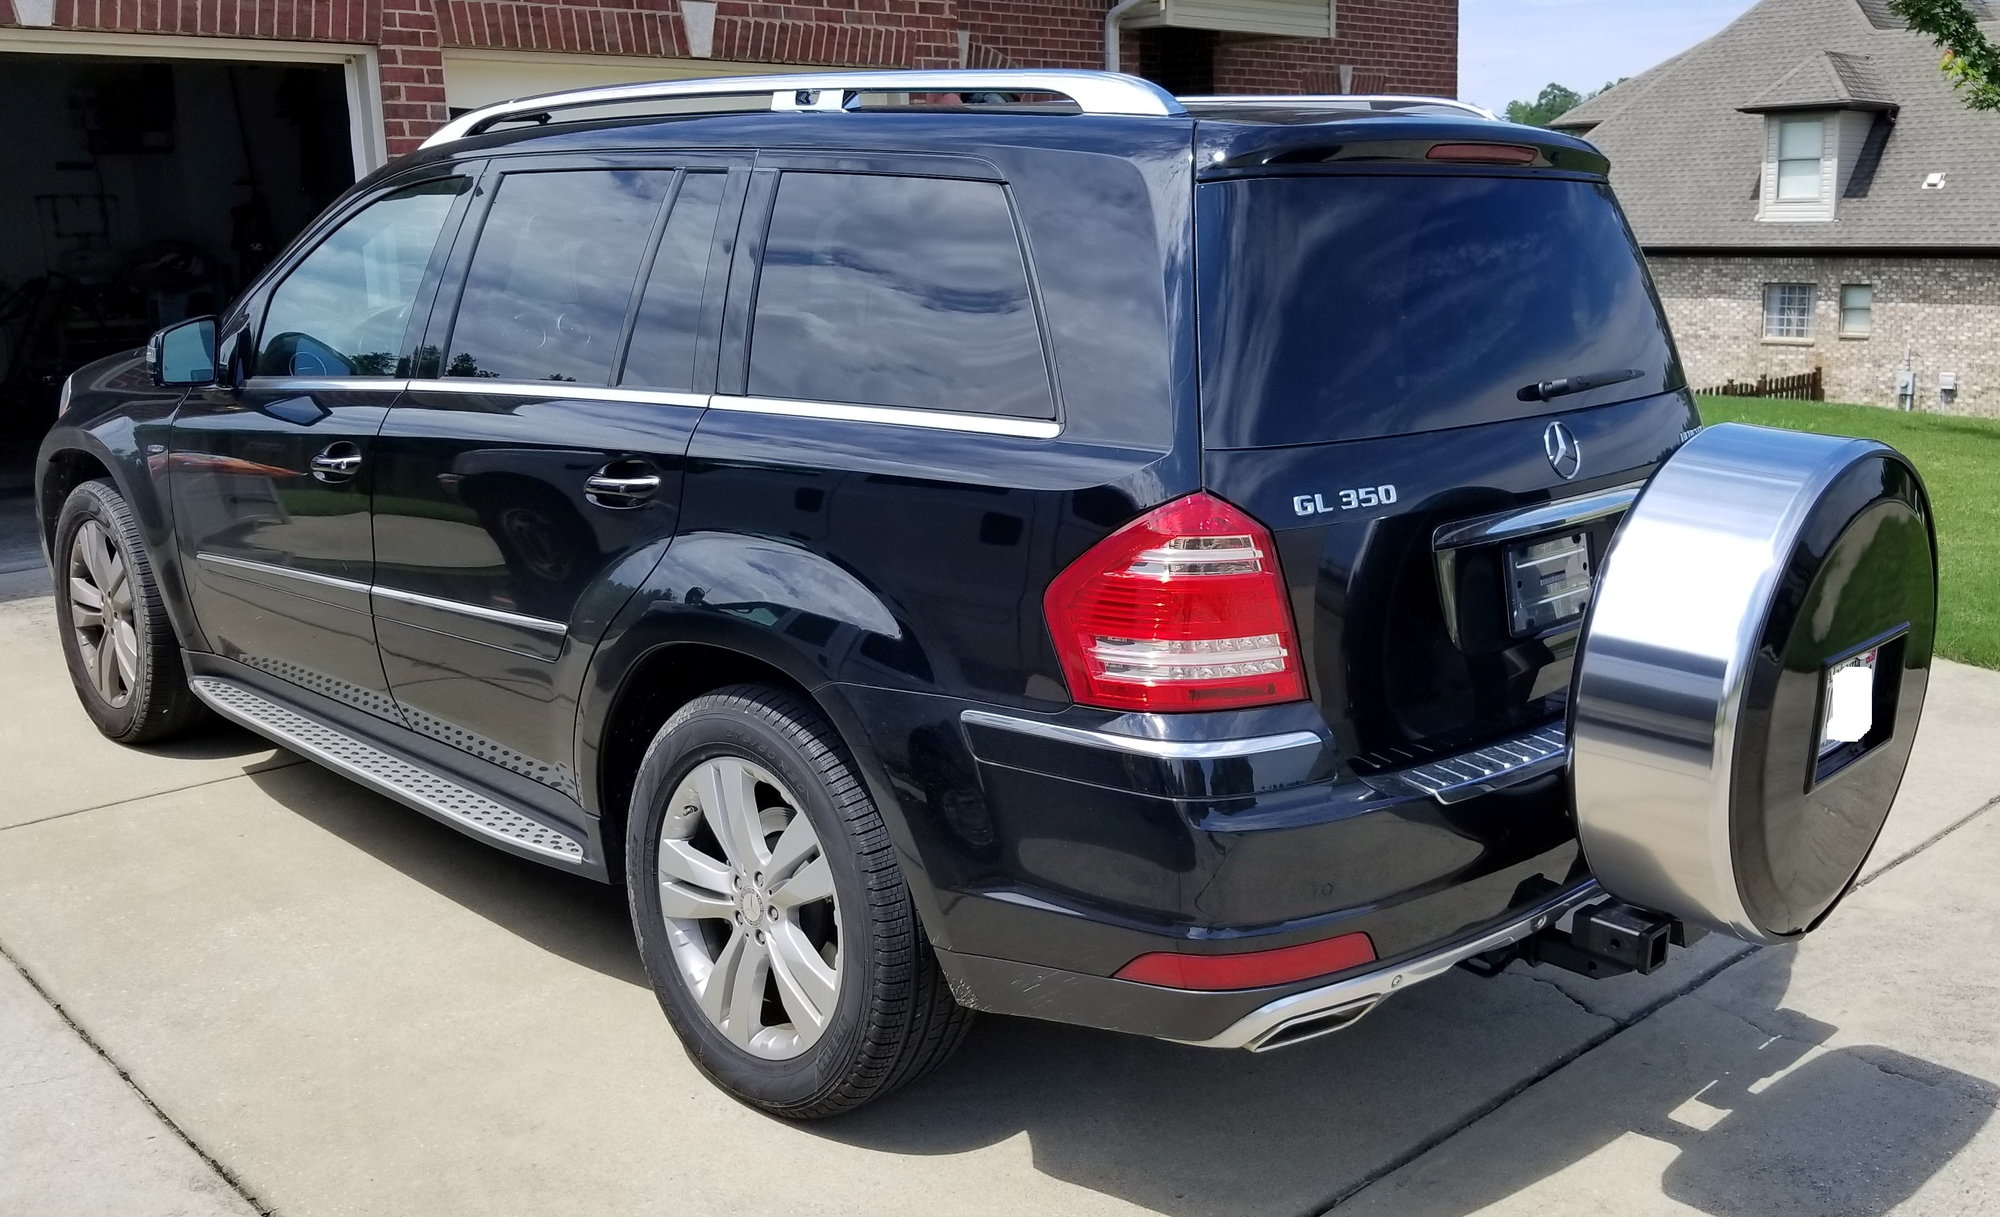 Wheels and Tires/Axles - Spare Tire carrier for ML and GL models - hitch mount *NO MODS* - Used - 2006 to 2018 Mercedes-Benz GL350 - Birmingham, AL 35243, United States